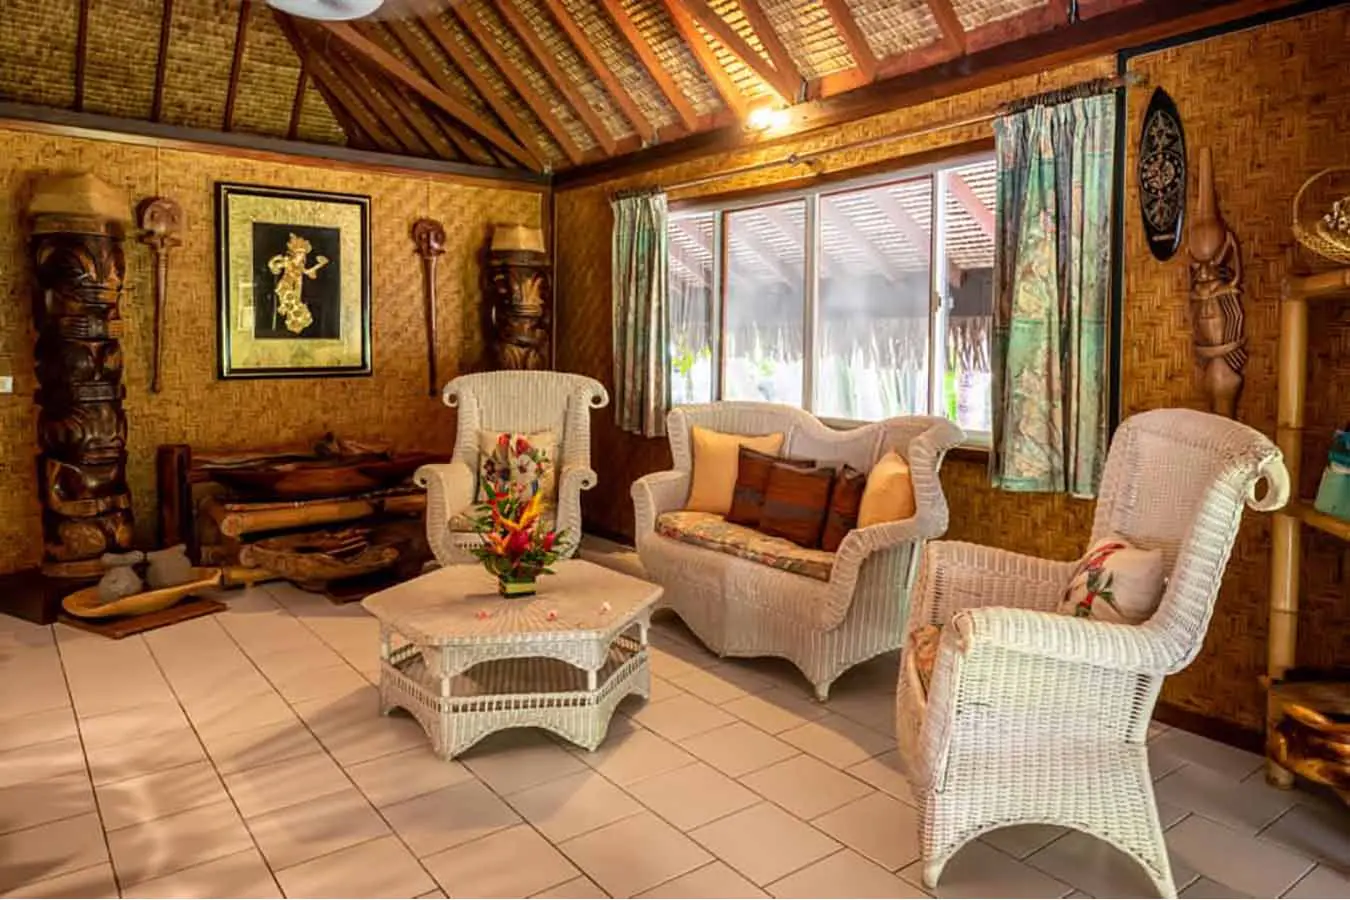 Wooden dining table in the living room of the Bora Bora vacation home